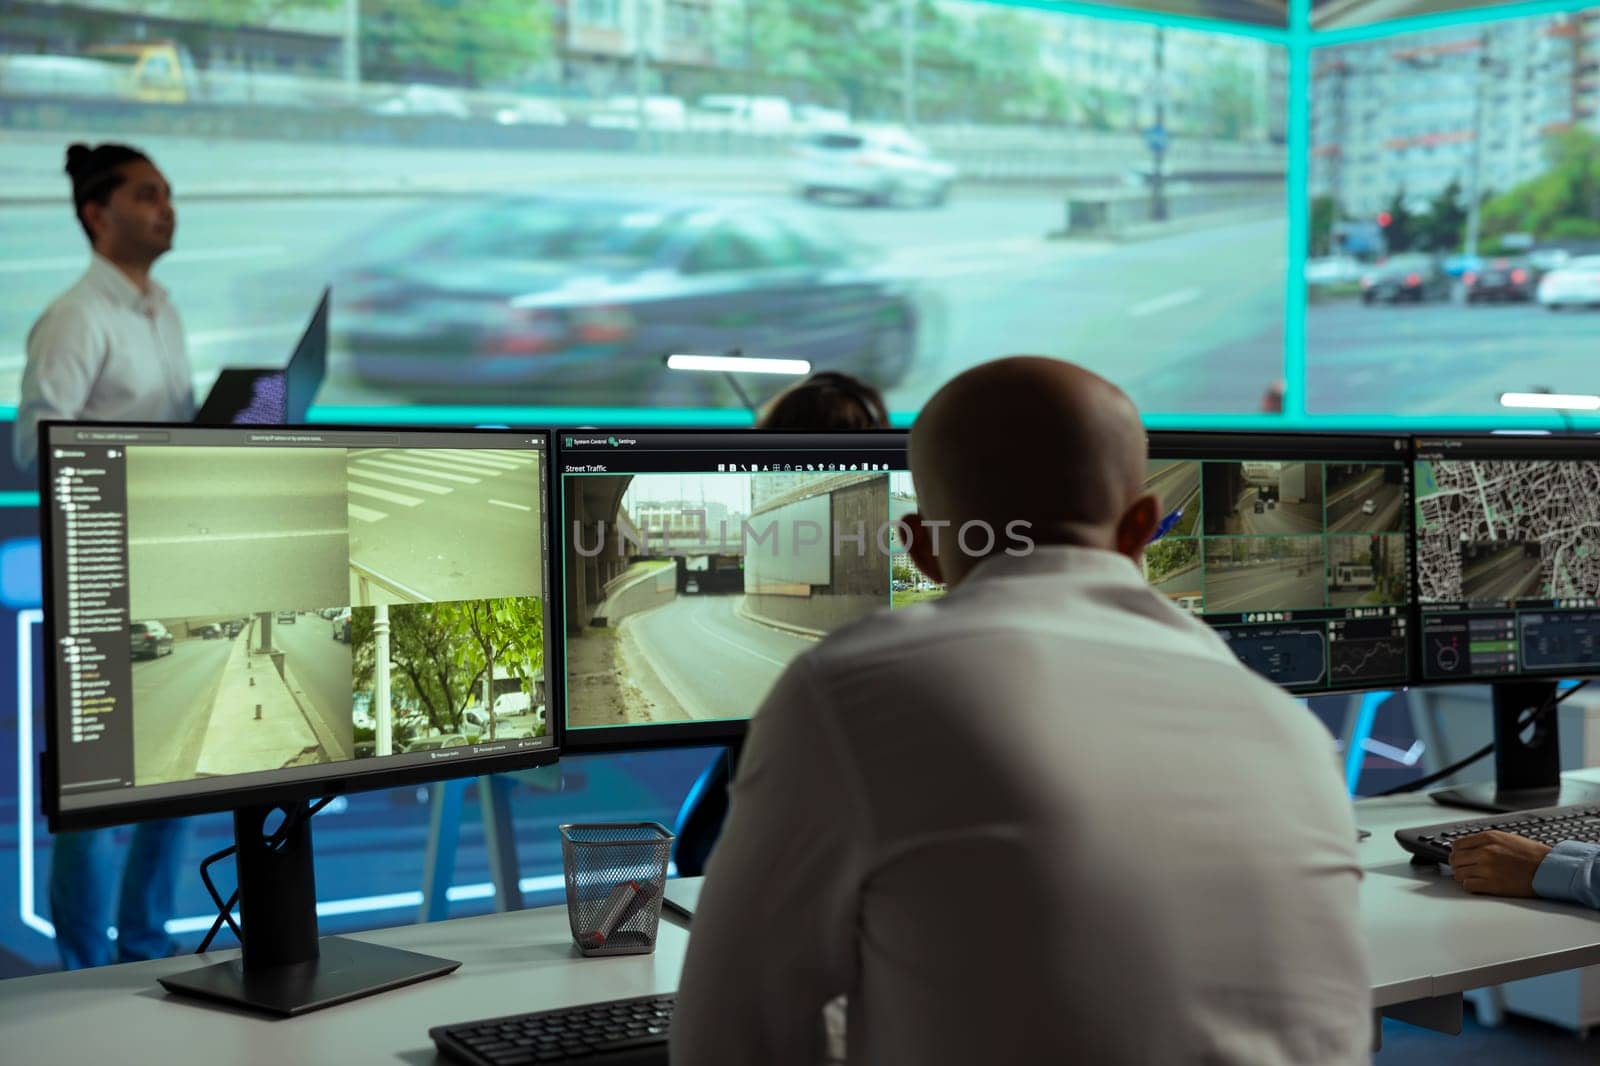 Middle eastern man overseeing the traffic surveillance footage on multiple displays, monitoring radar activity in an observation room. Team of people handling license plate reading on CCTV.